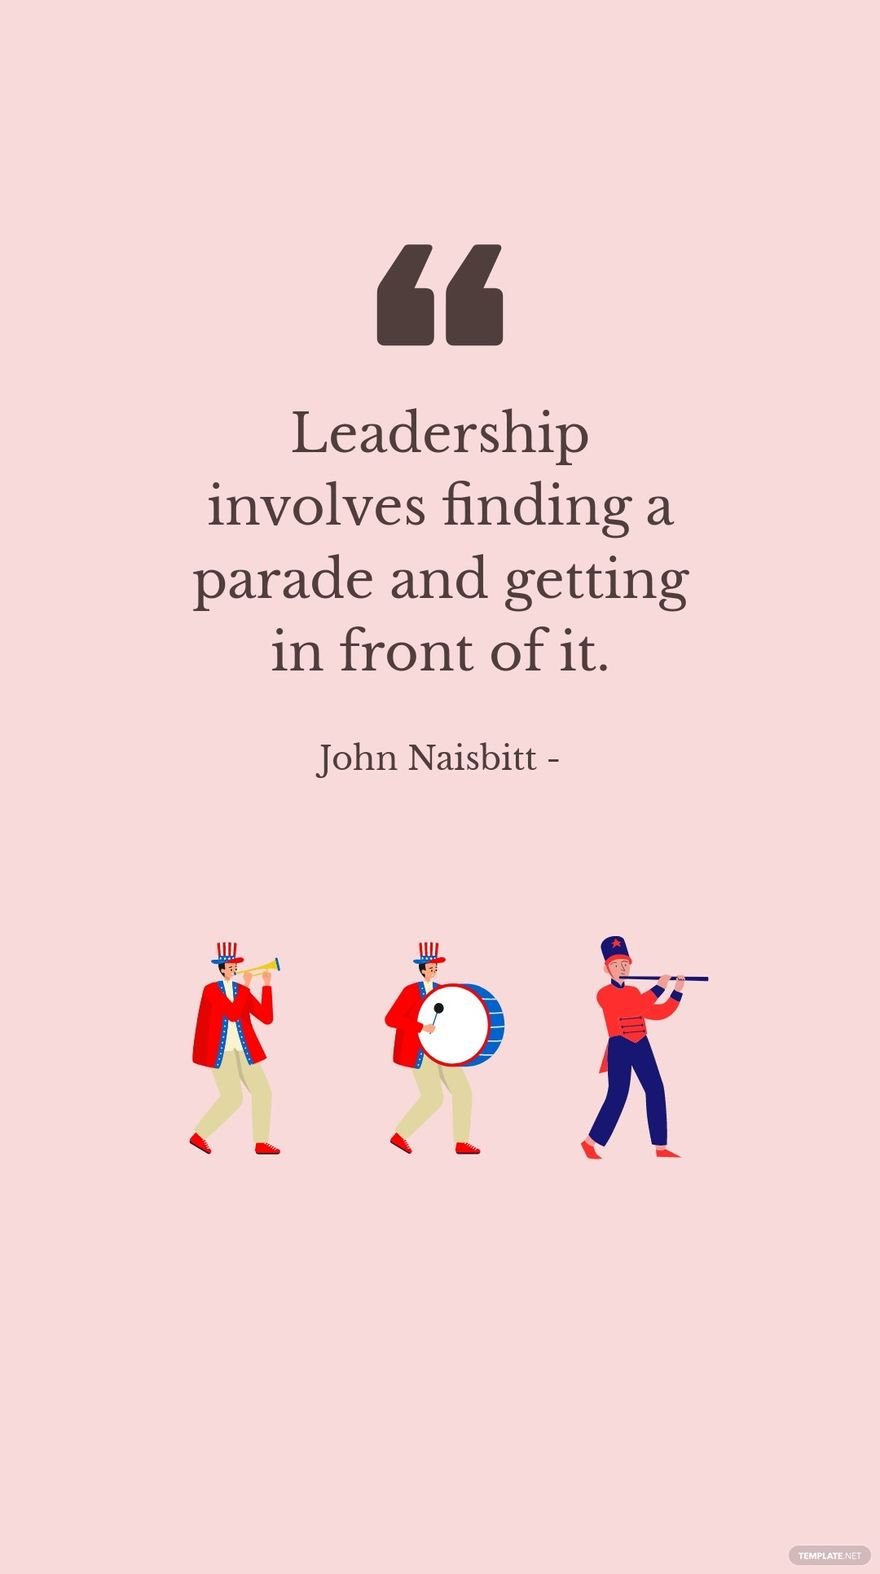 Free John Naisbitt - Leadership involves finding a parade and getting in front of it. in JPG